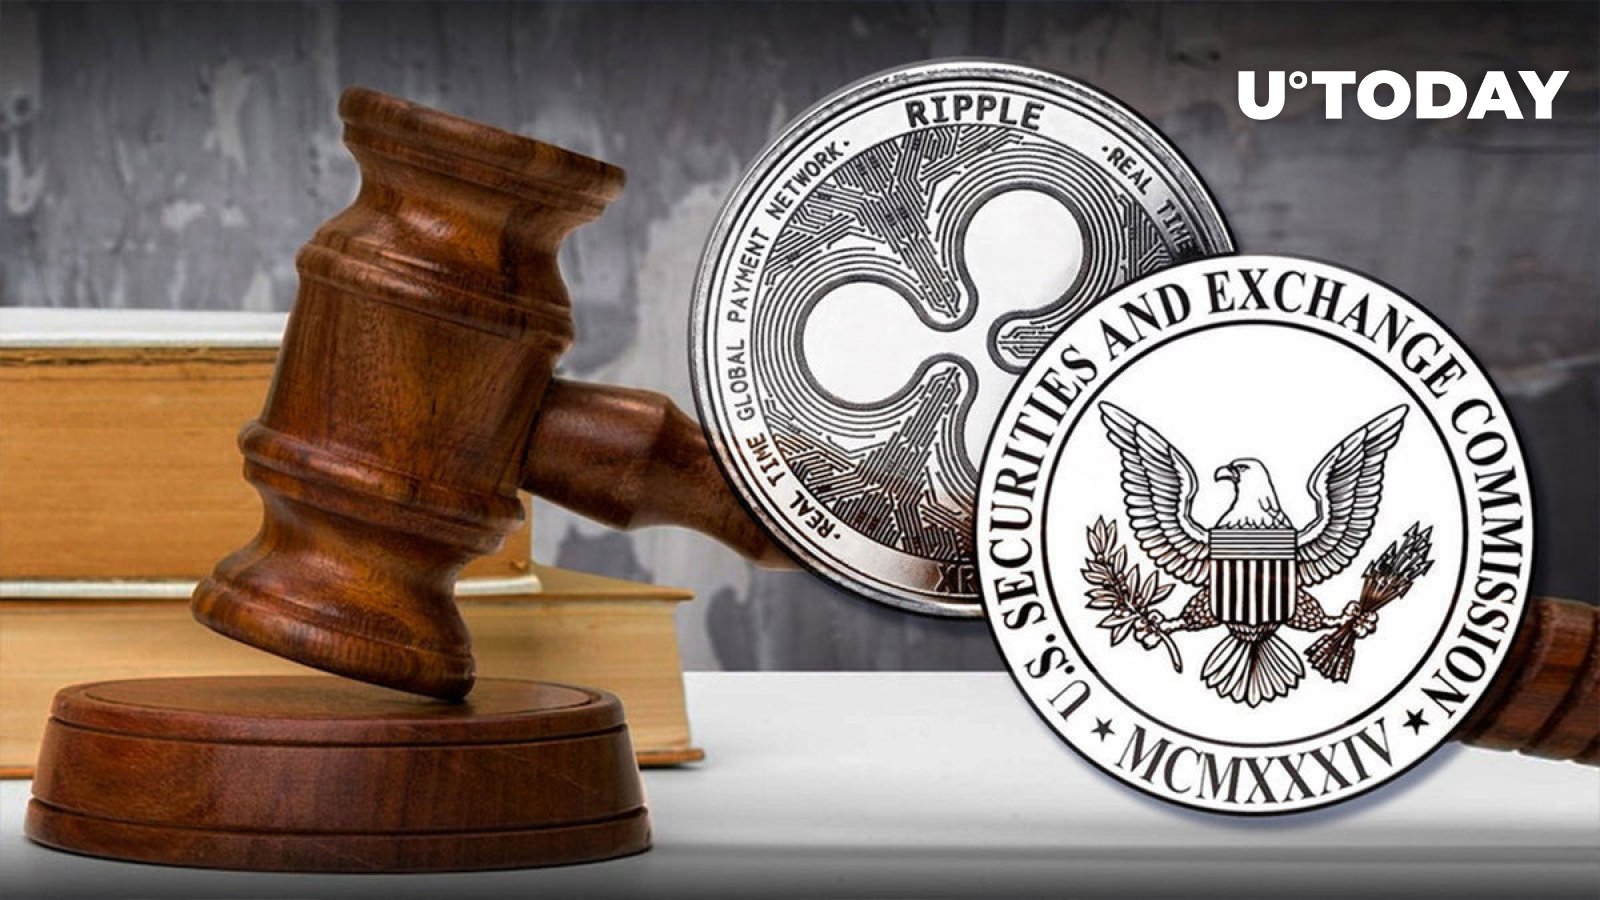 pro-ripple-lawyer-says-sec-will-lose-given-these-facts-details